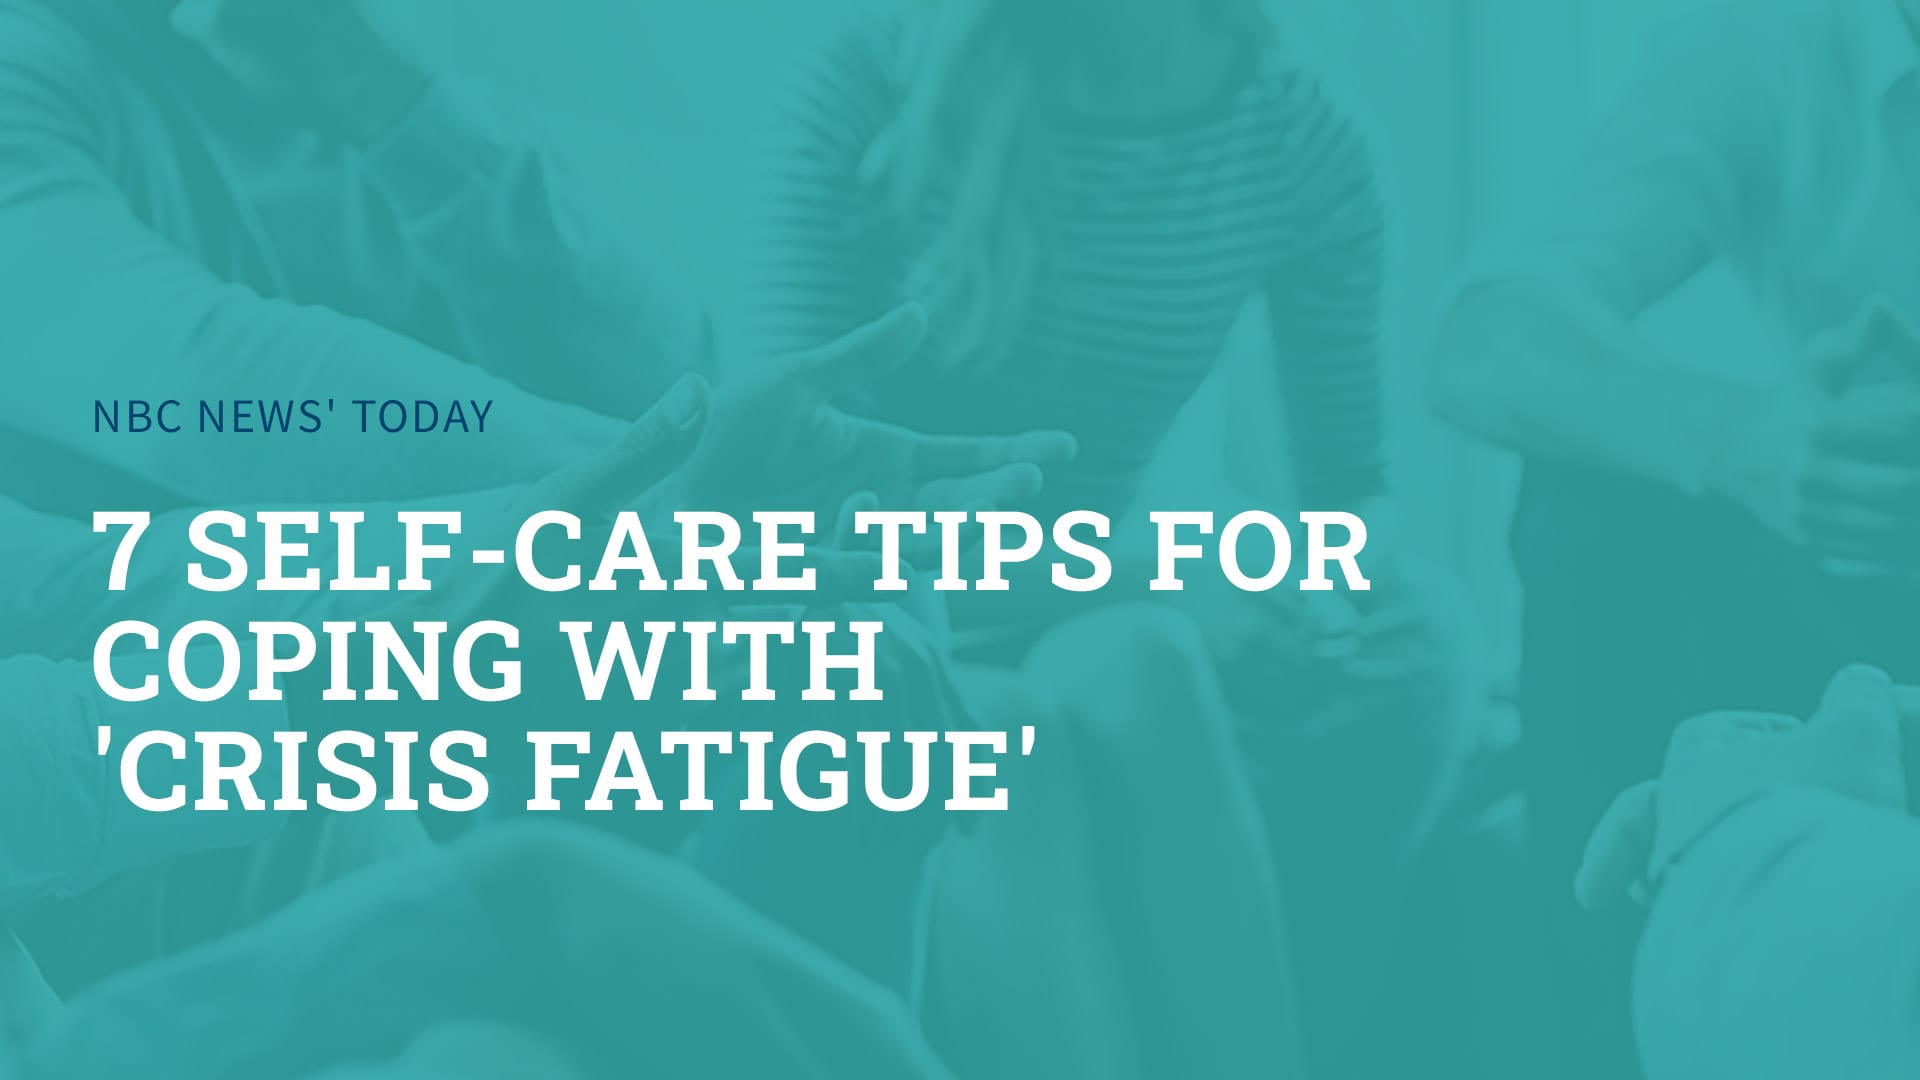 7 self-care tips for coping with ‘crisis fatigue’